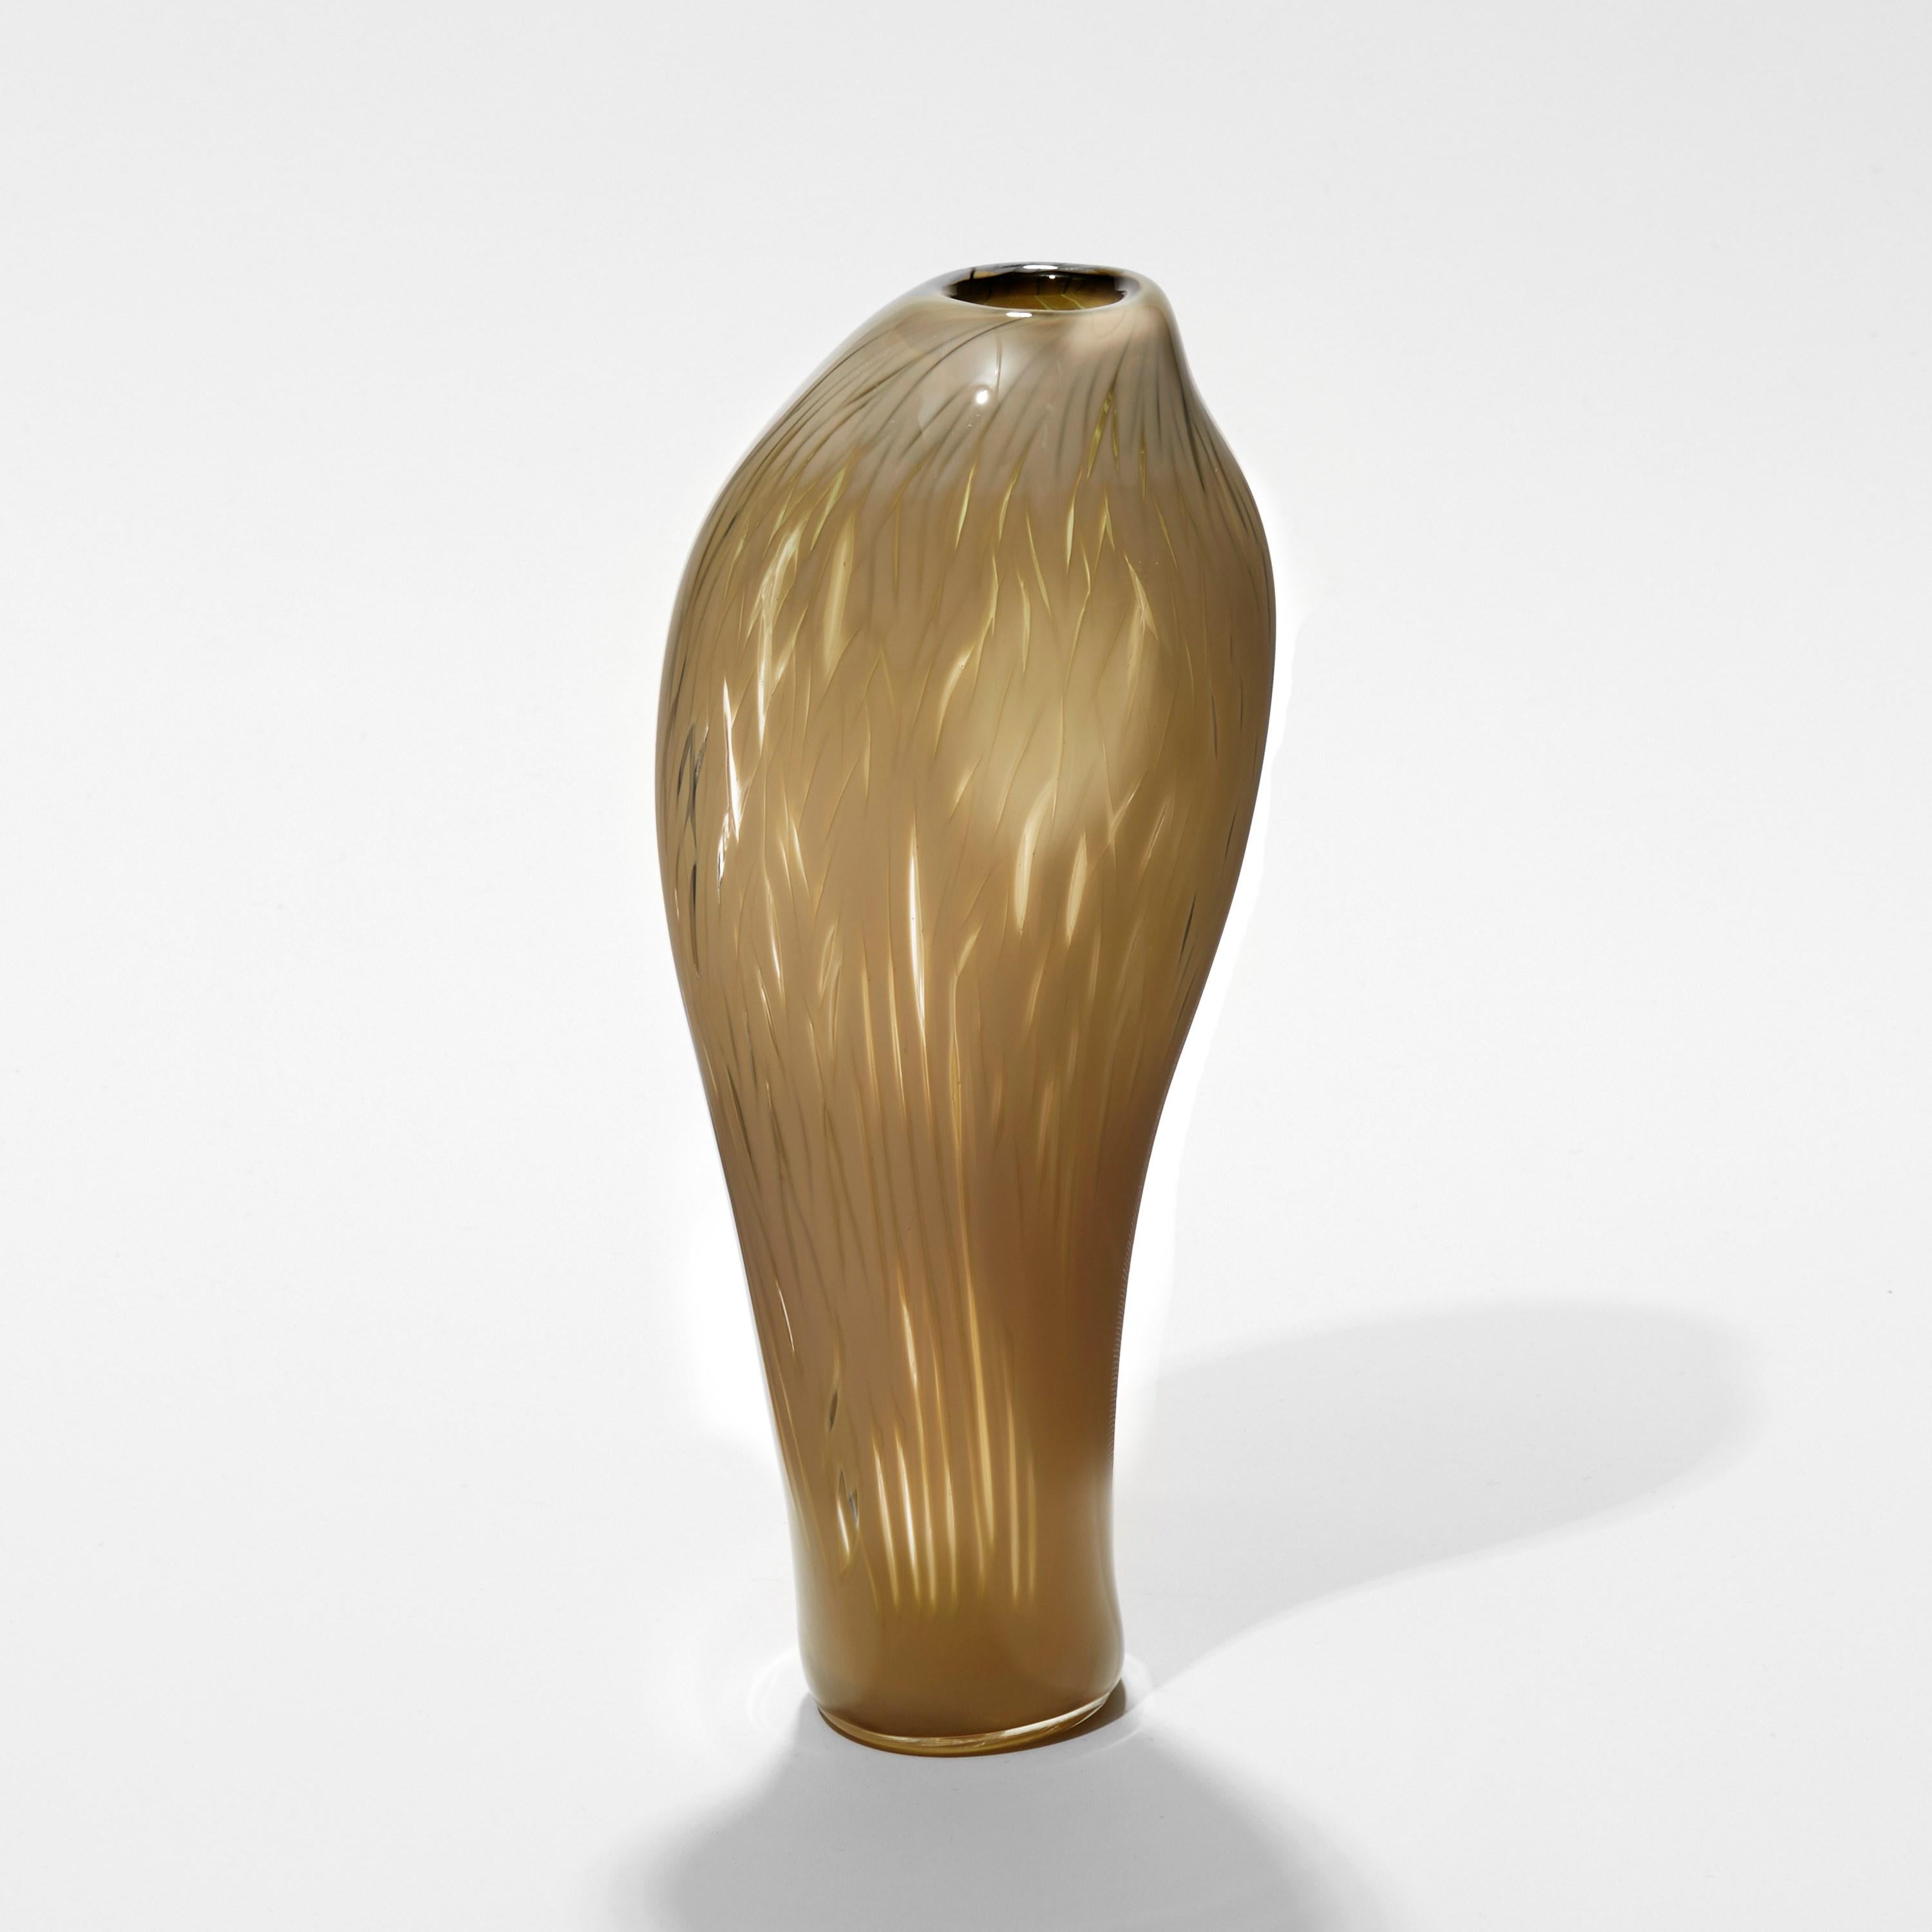 'Cotinus II' is a unique glass artwork by the Canadian artist, Michèle Oberdieck.

Michèle Oberdieck explores balance and asymmetry through colour, form and surface decoration. Presenting her sculptural works as a gesture, an expressive mark,